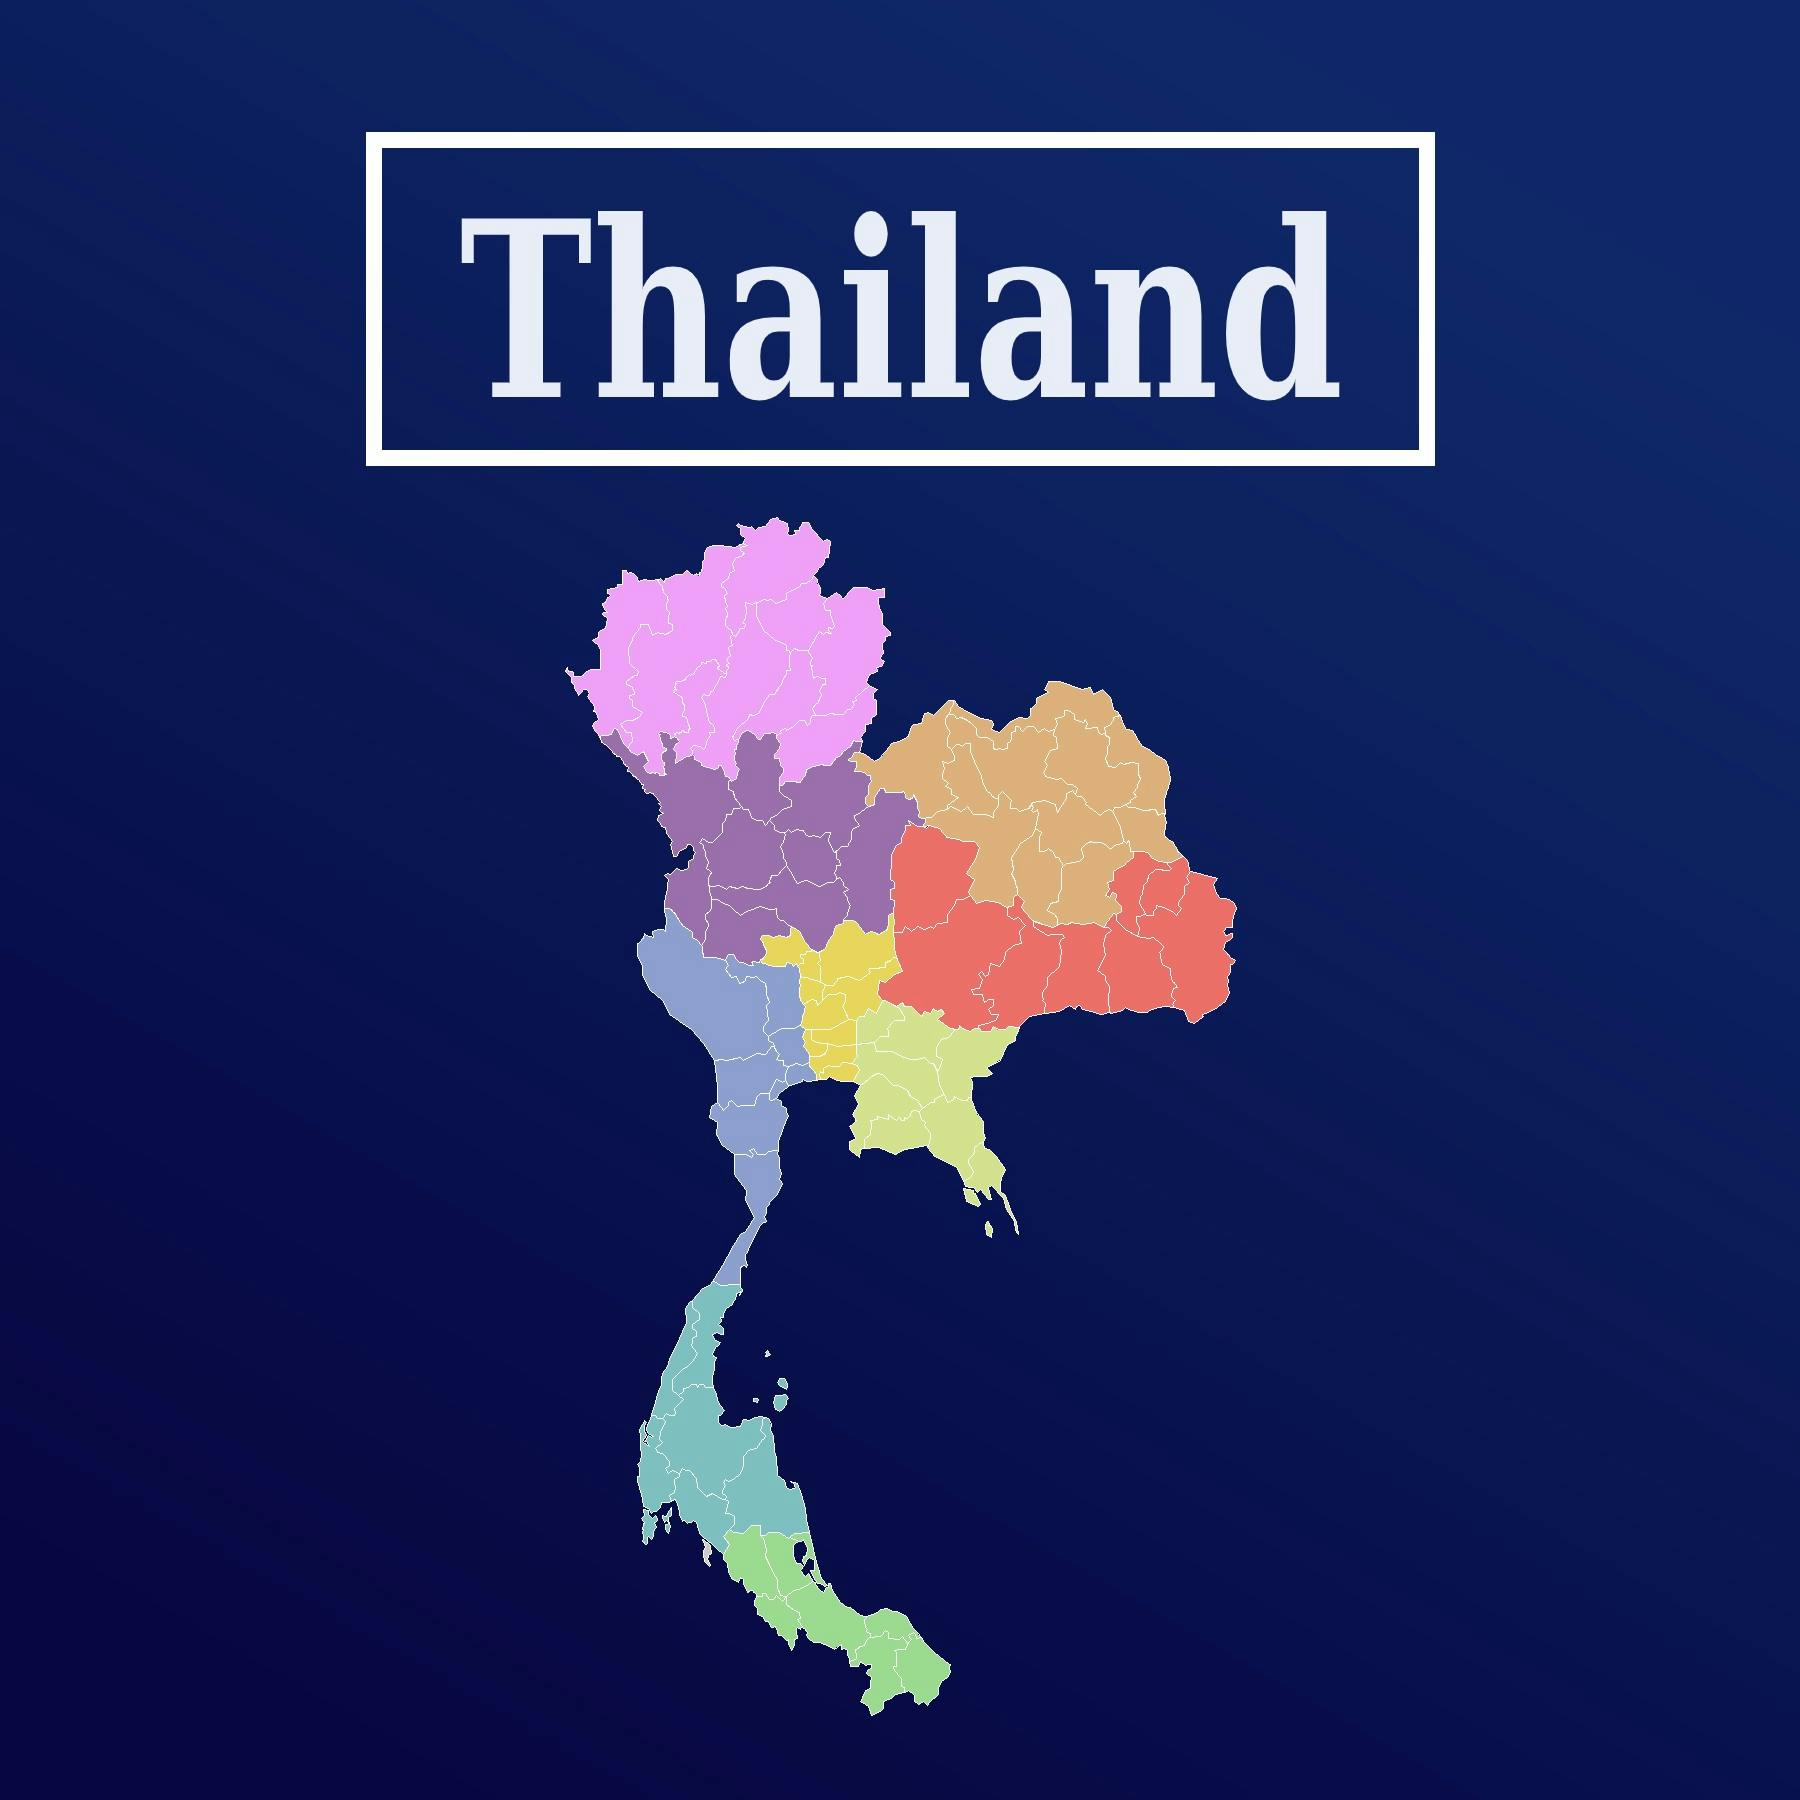 Episode 11: Thailand and the Development of Monarchy